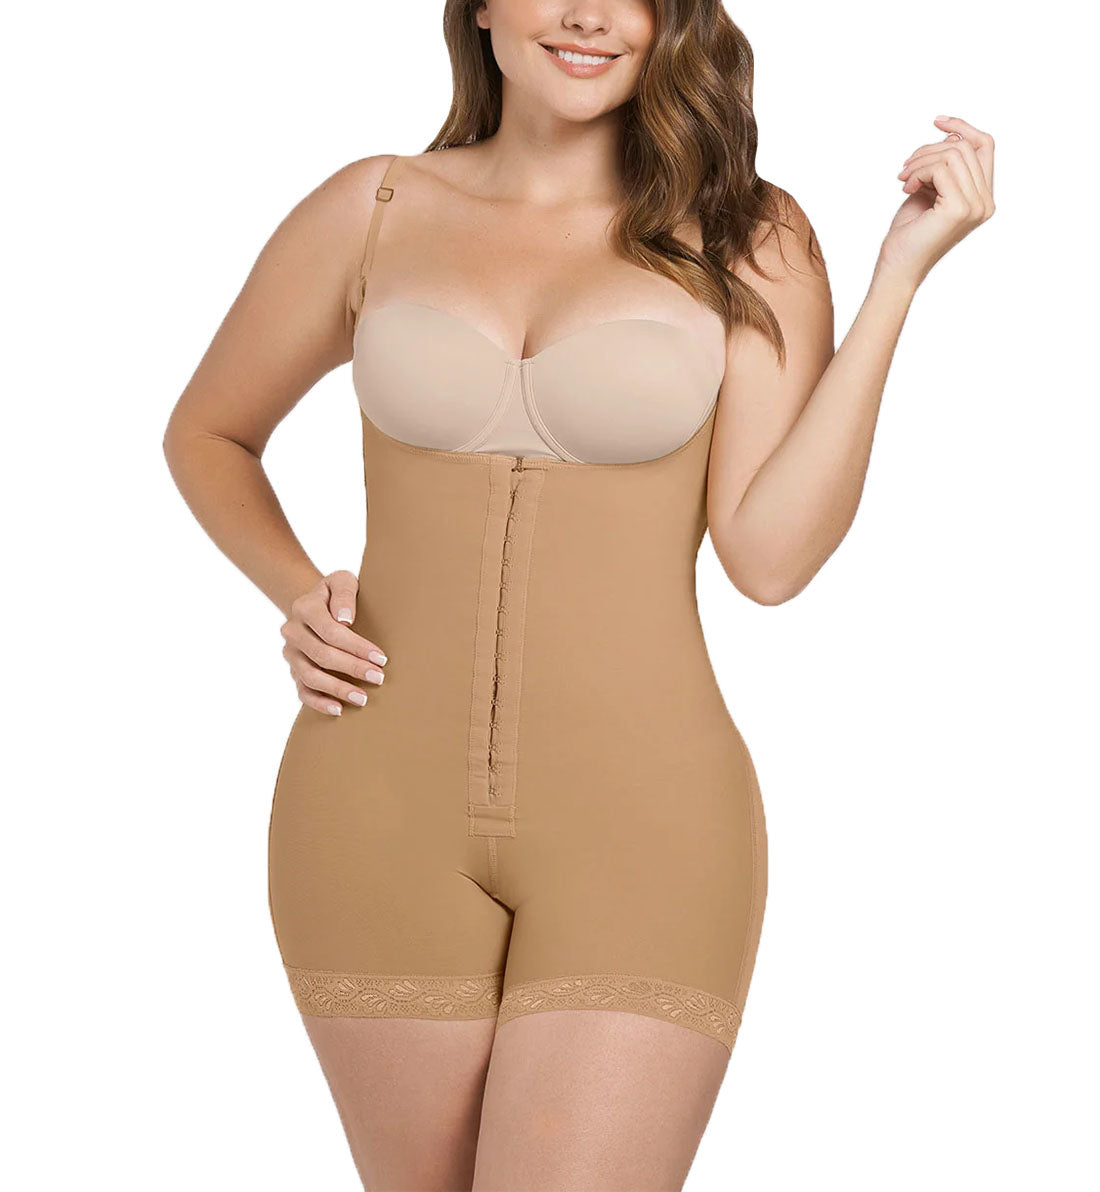 Leonisa Firm Compression Shaper with Boyshort Butt Lifter (018491),Small,Beige - Beige,Small